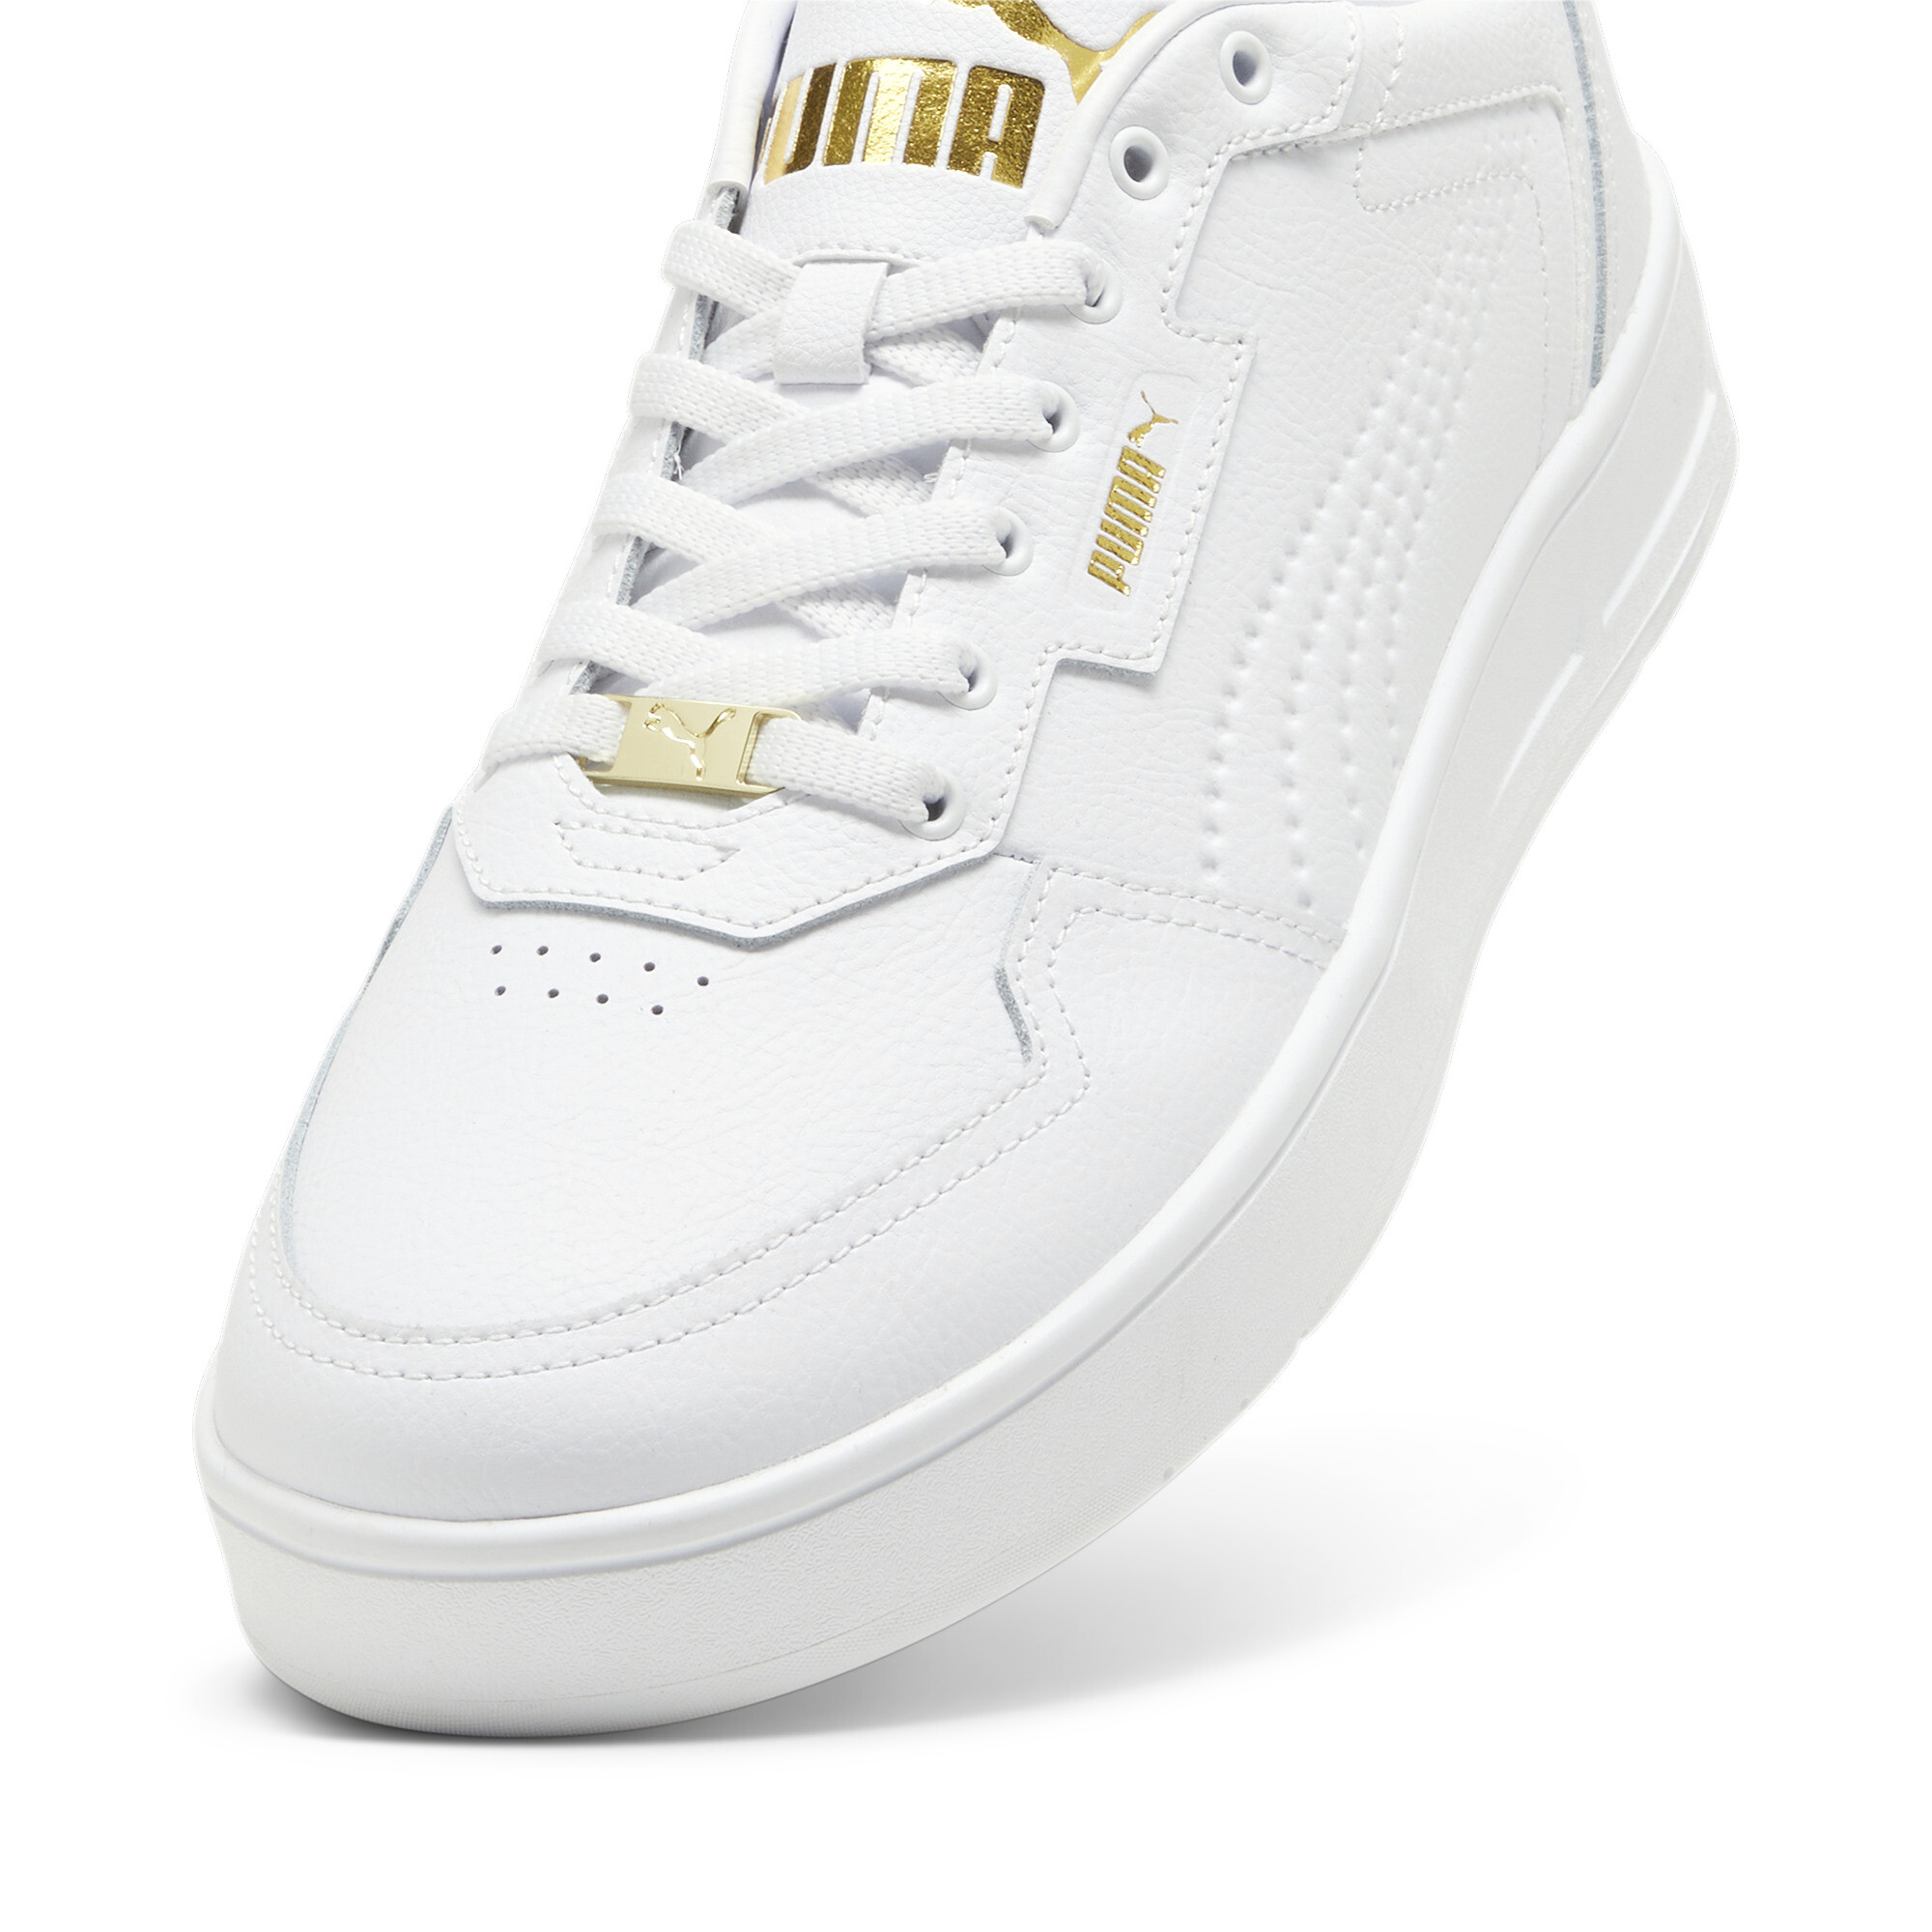 Puma Court Classic Lux Sneakers, White, Size 45, Shoes